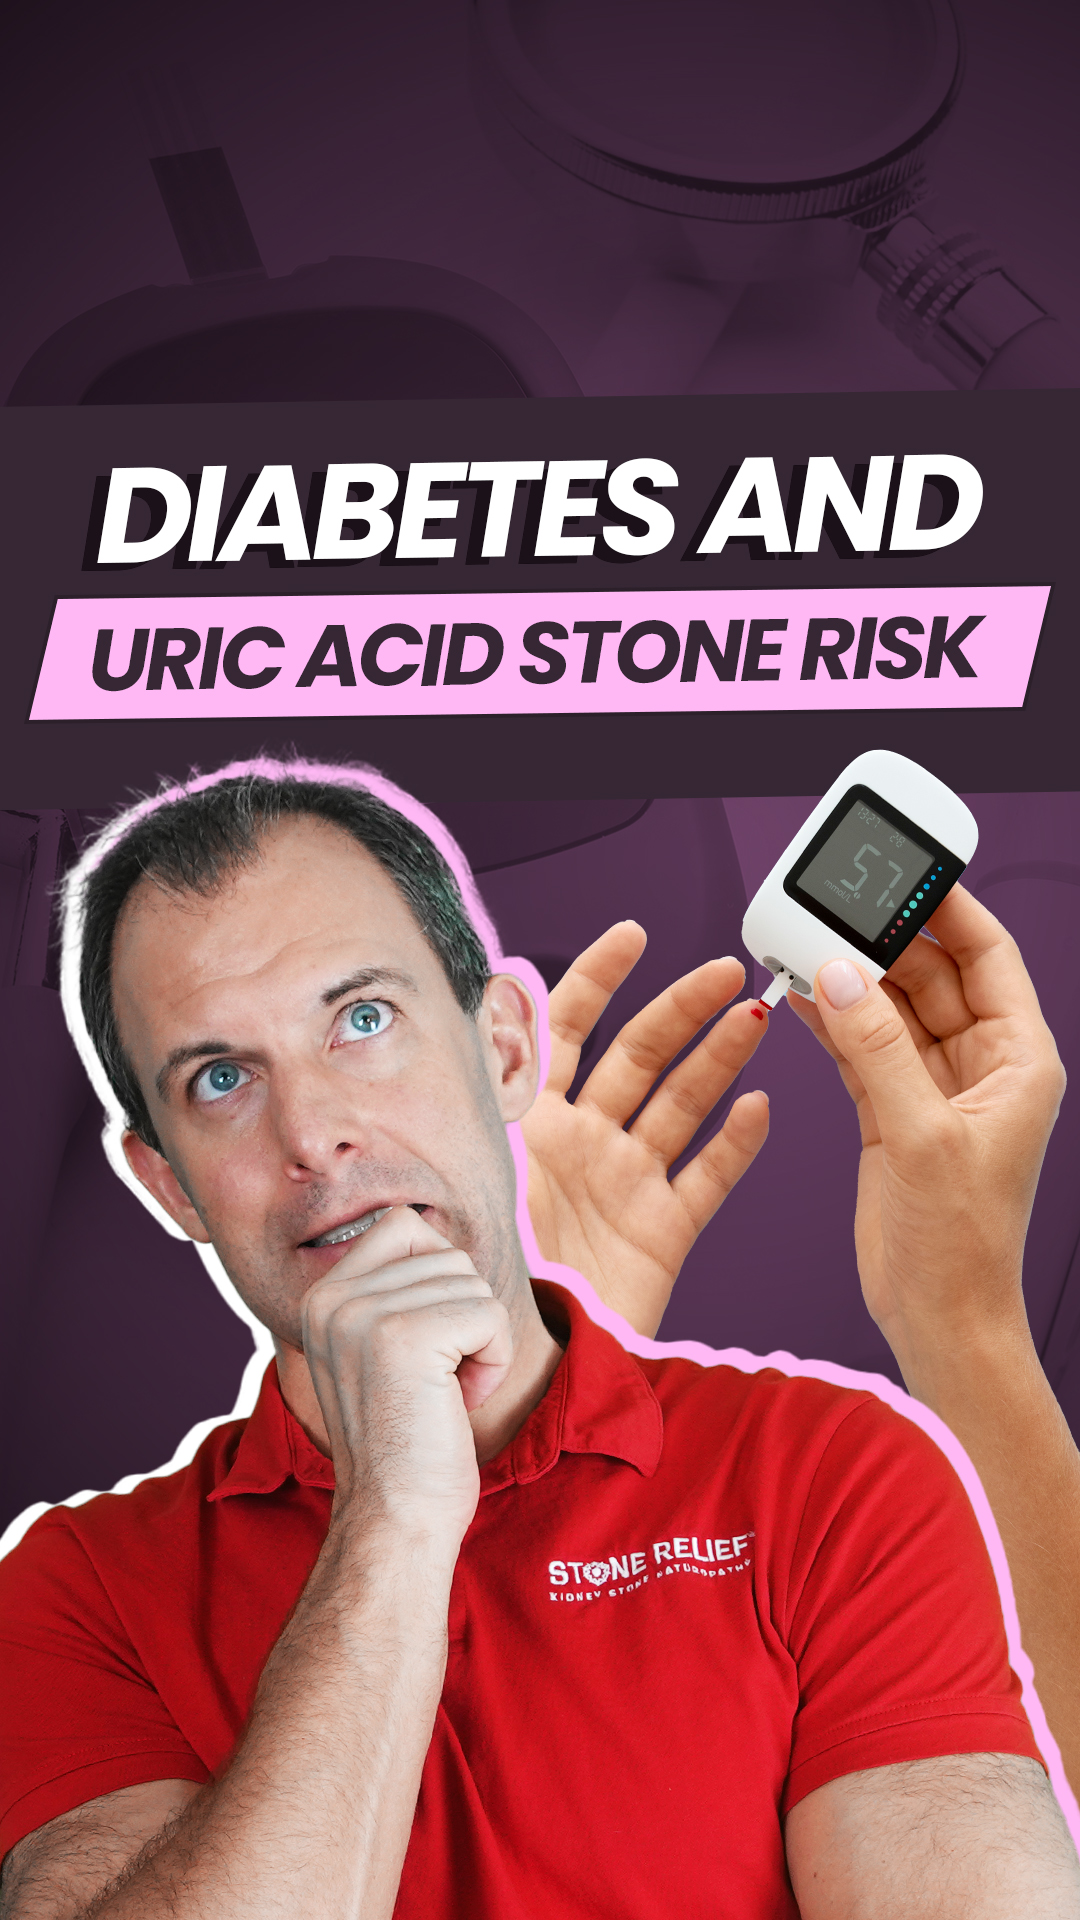 Diabetes and uric acid stones connection